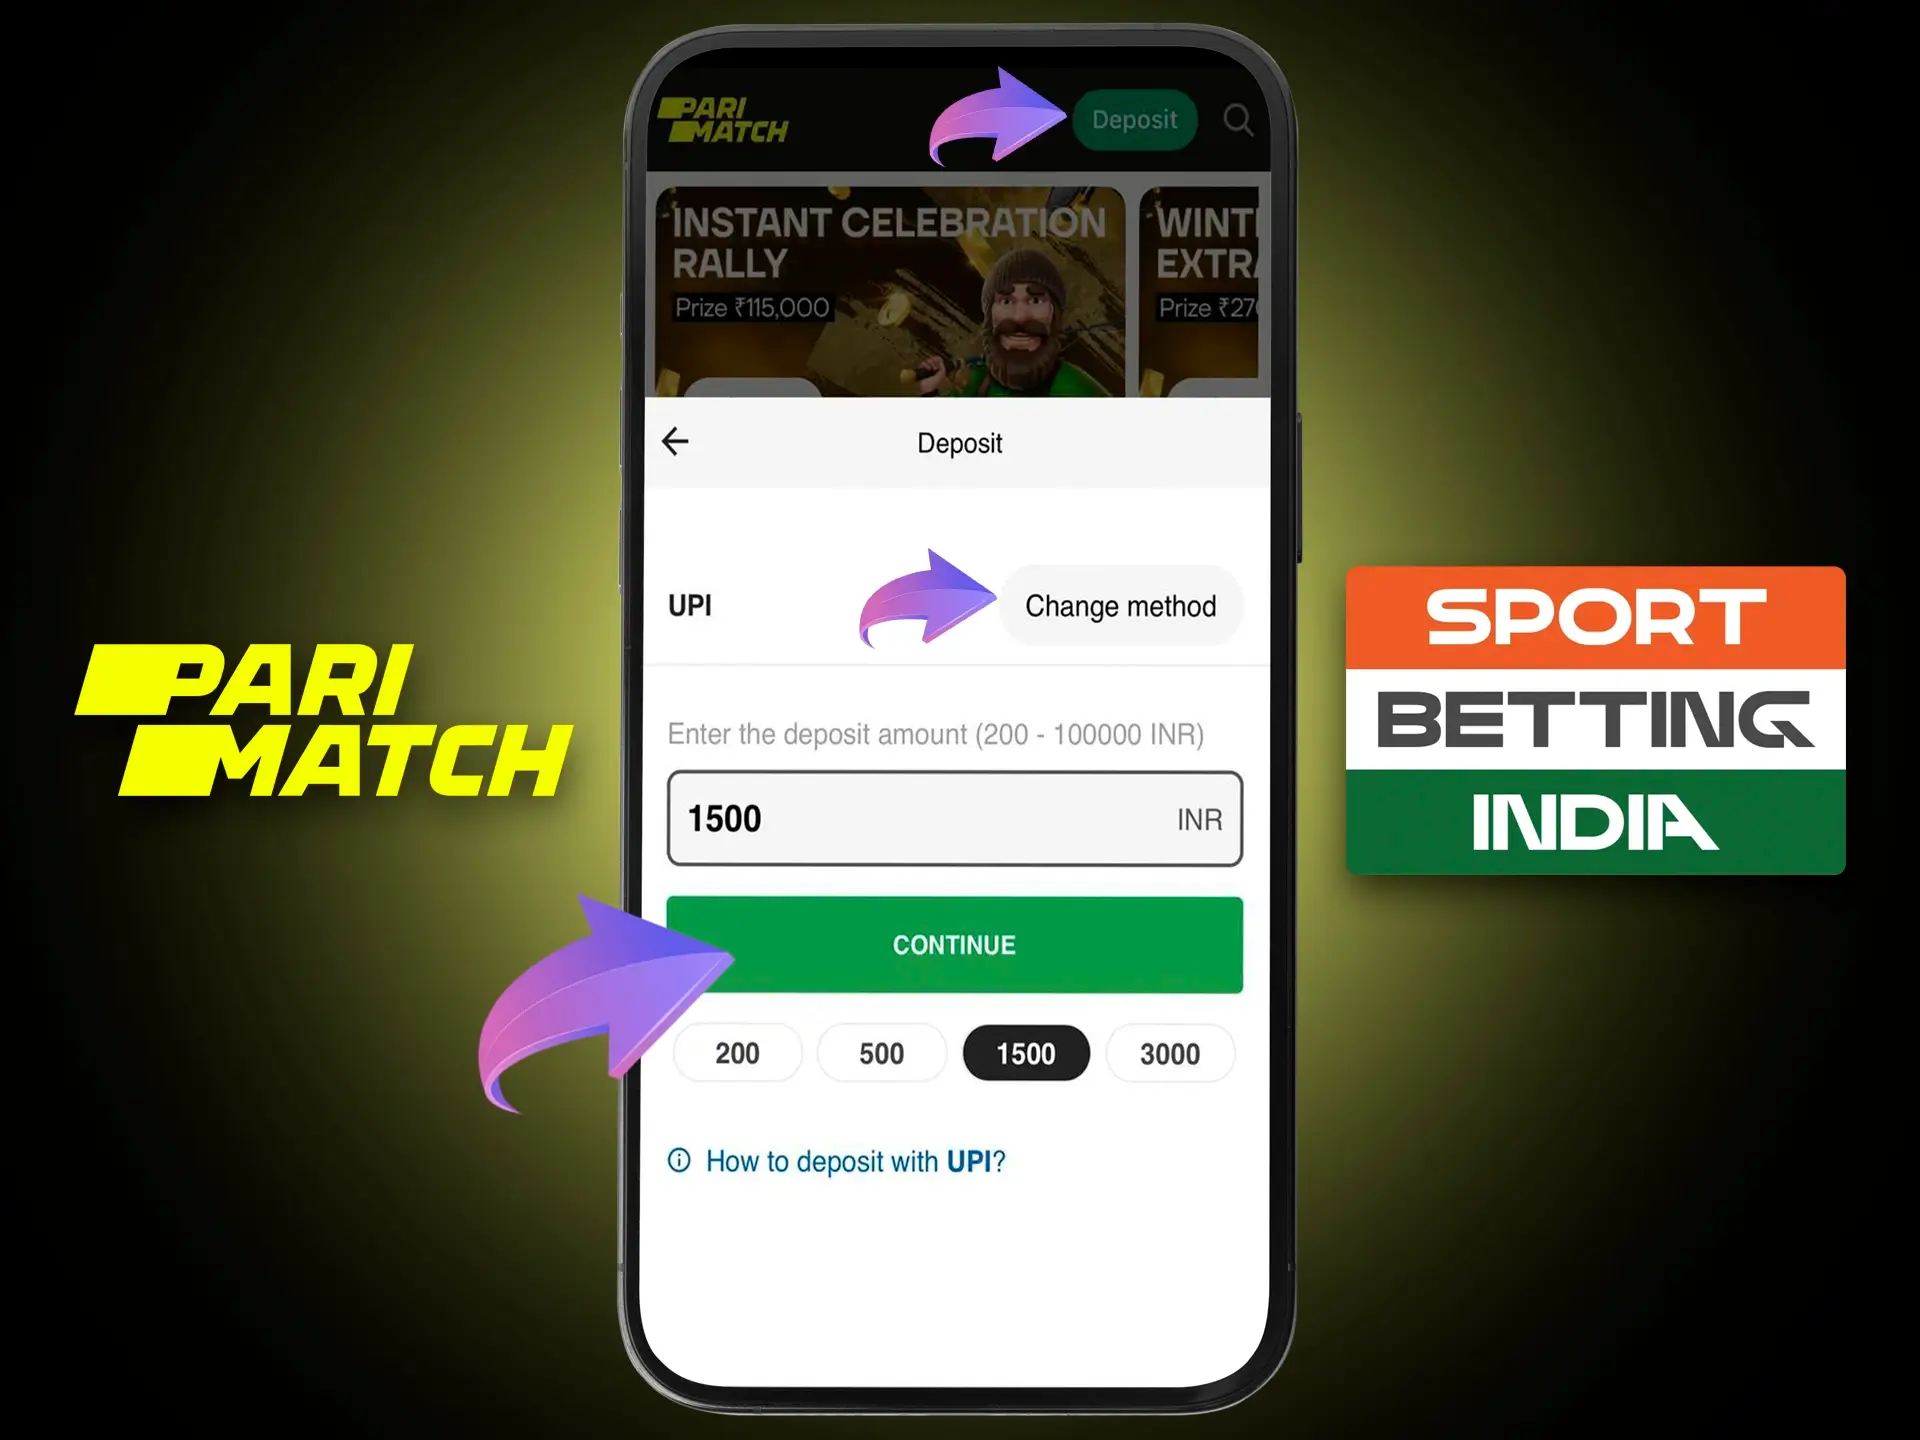 Make your first deposit at Parimatch to get full access to the betting features and website.